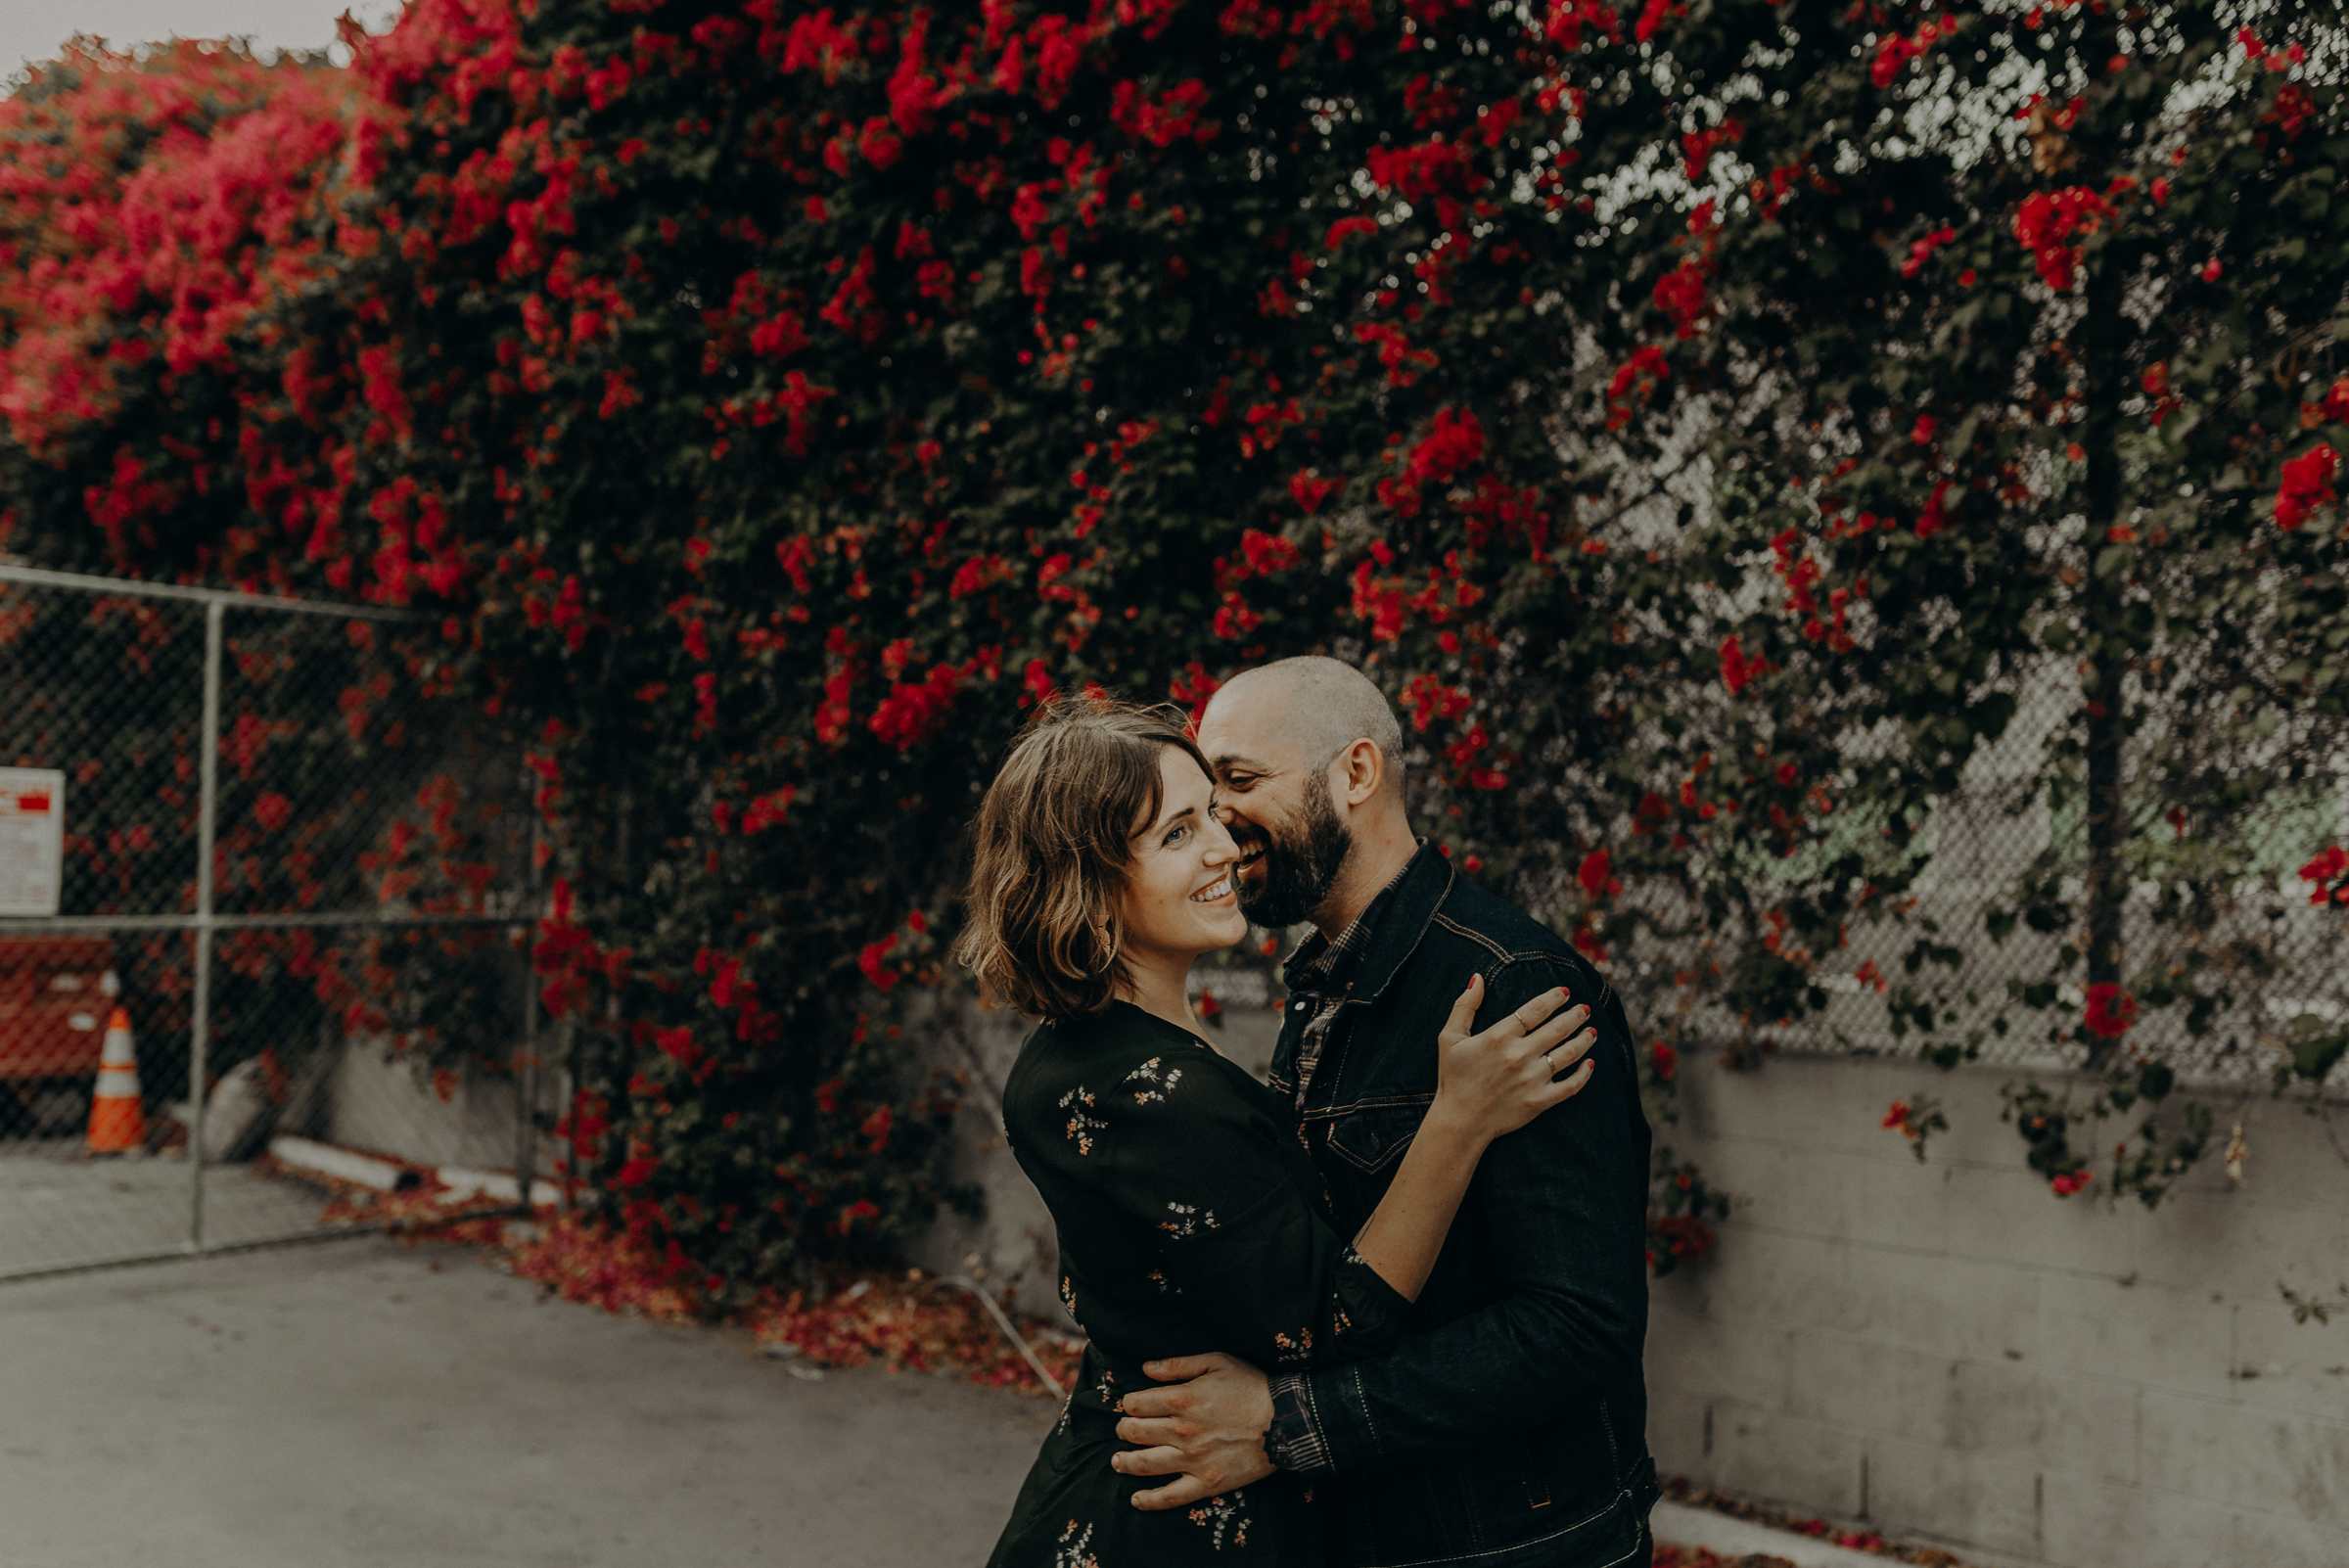 Isaiah + Taylor Photography - Downtown Los Angeles Arts District Engagement12.jpg